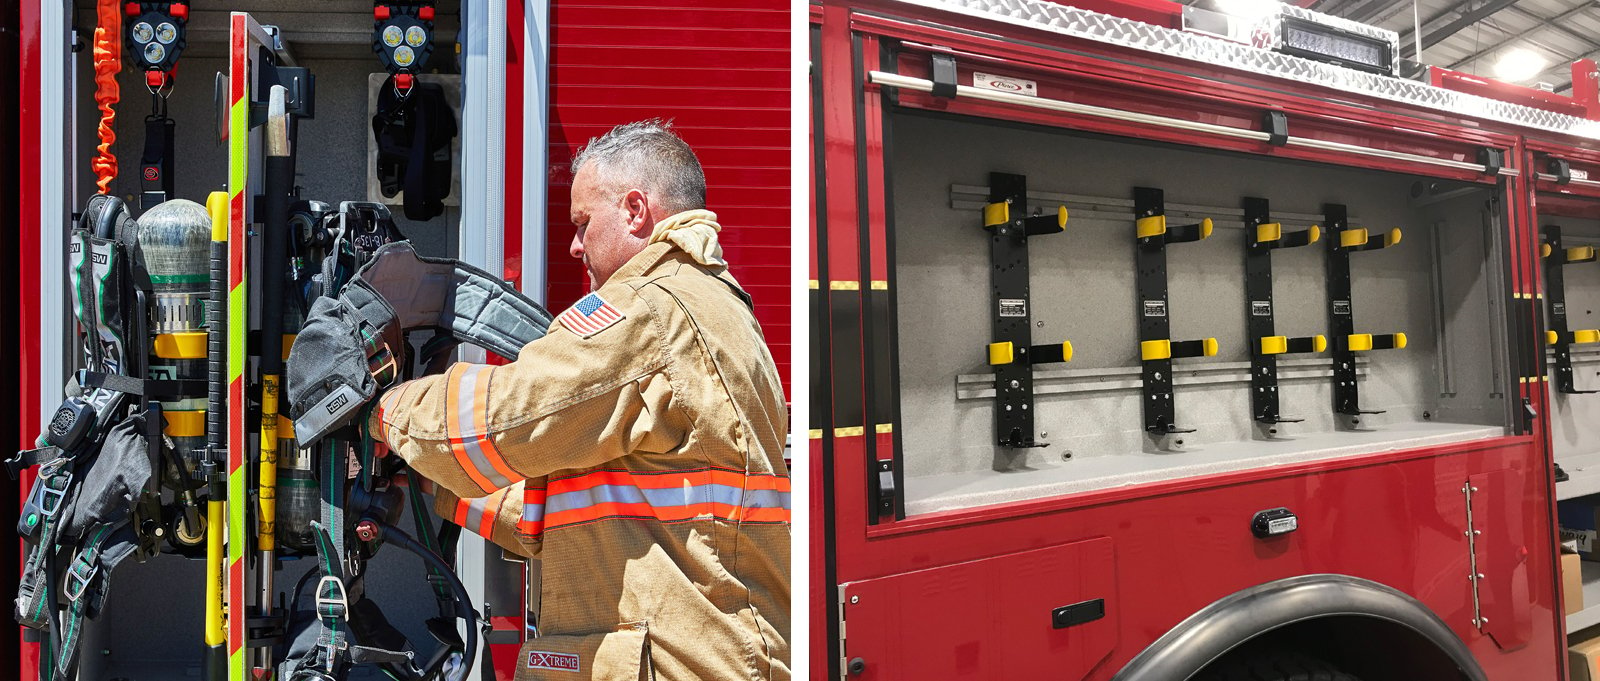 A firefighter accessing tools and gear from compartments located on the exterior of two red fire trucks. 